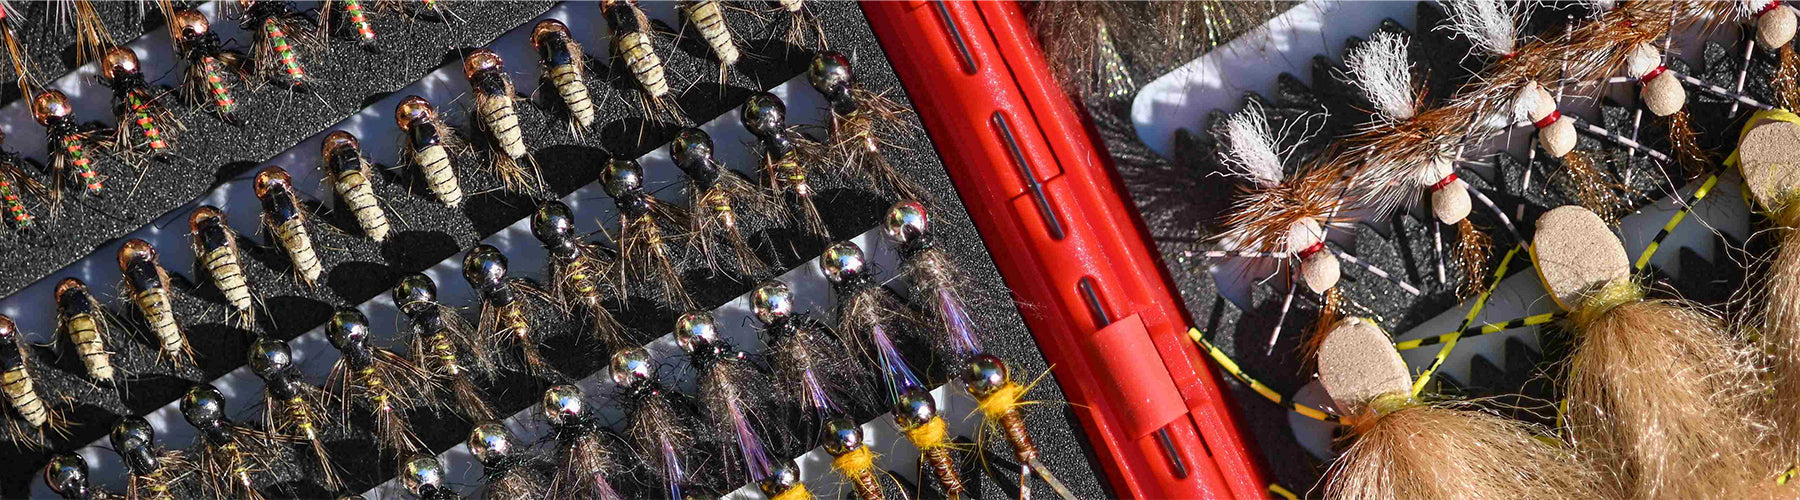 Croston's Chenille Worm Red Barbless – Fly Fish Food